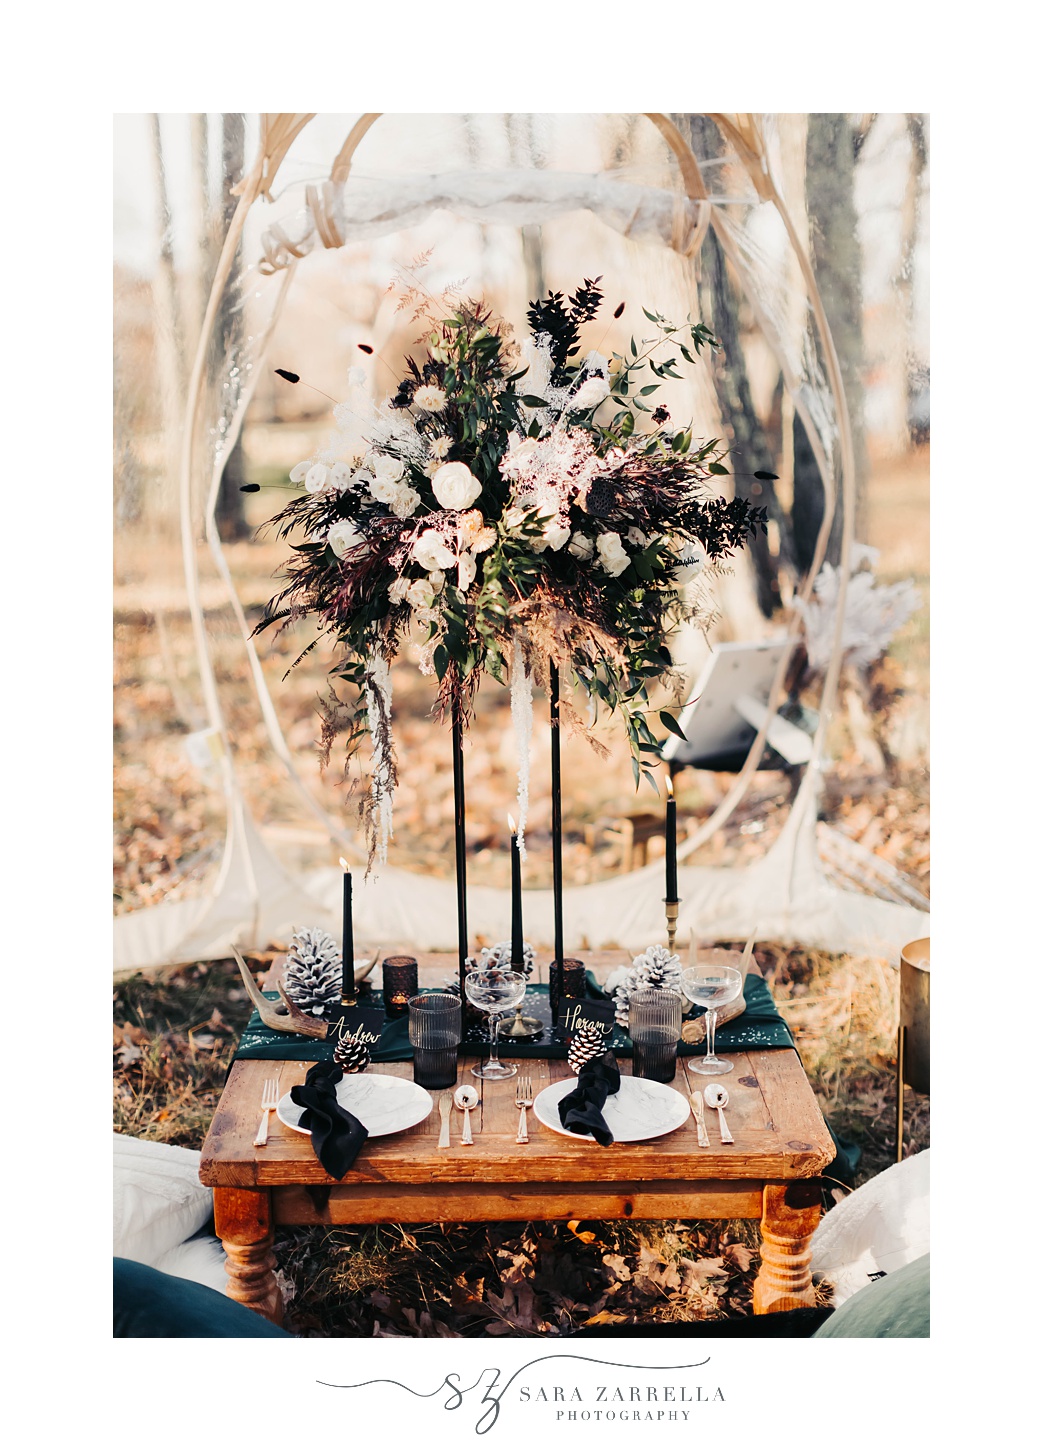 tall centerpieces for intimate and personal celebration at Gerald's Farm